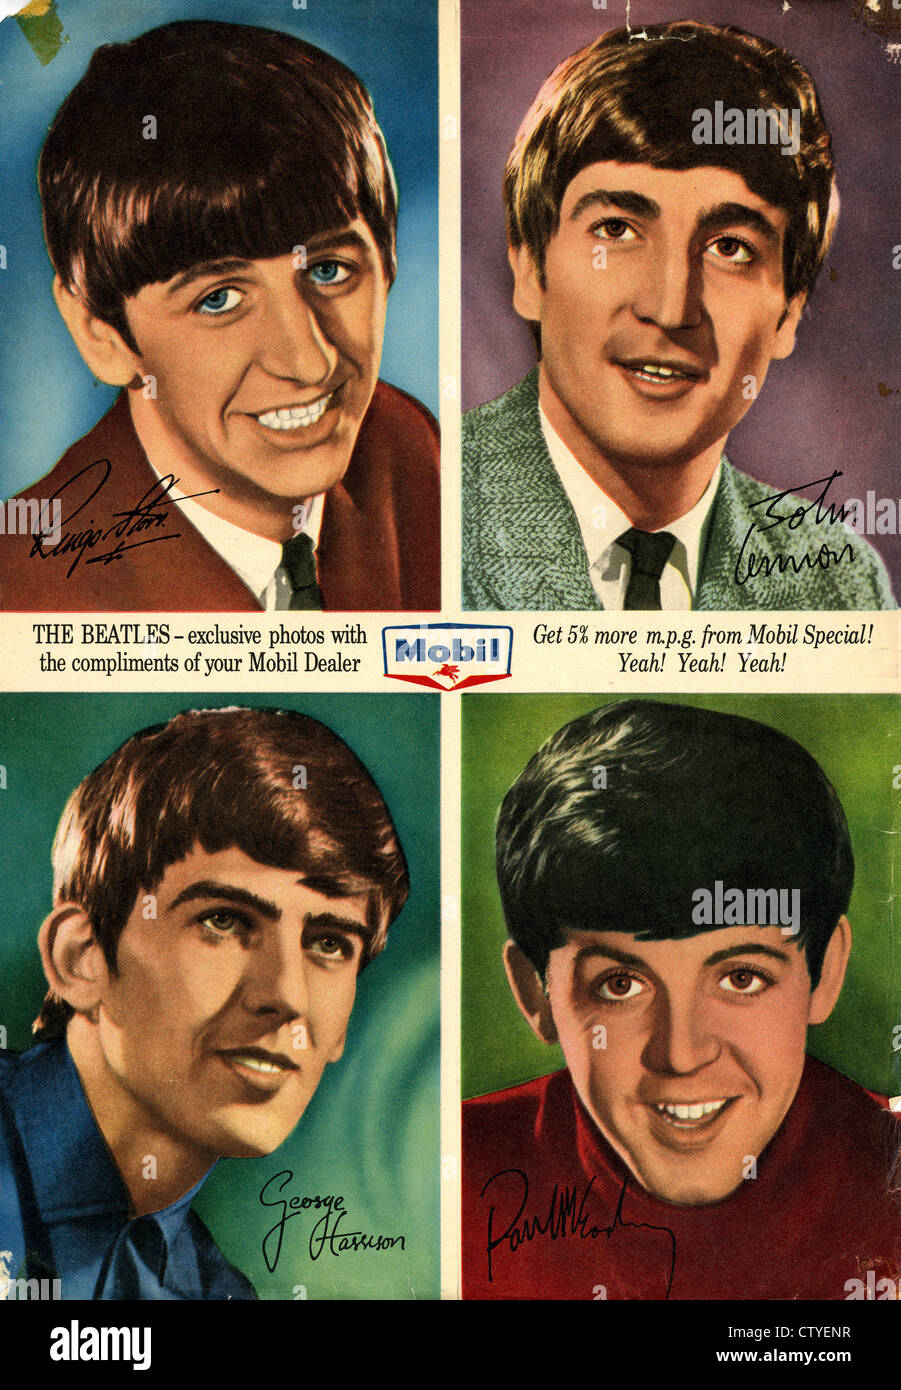 000891 - The Beatles Australian Mobil Poster from 1964 Stock Photo